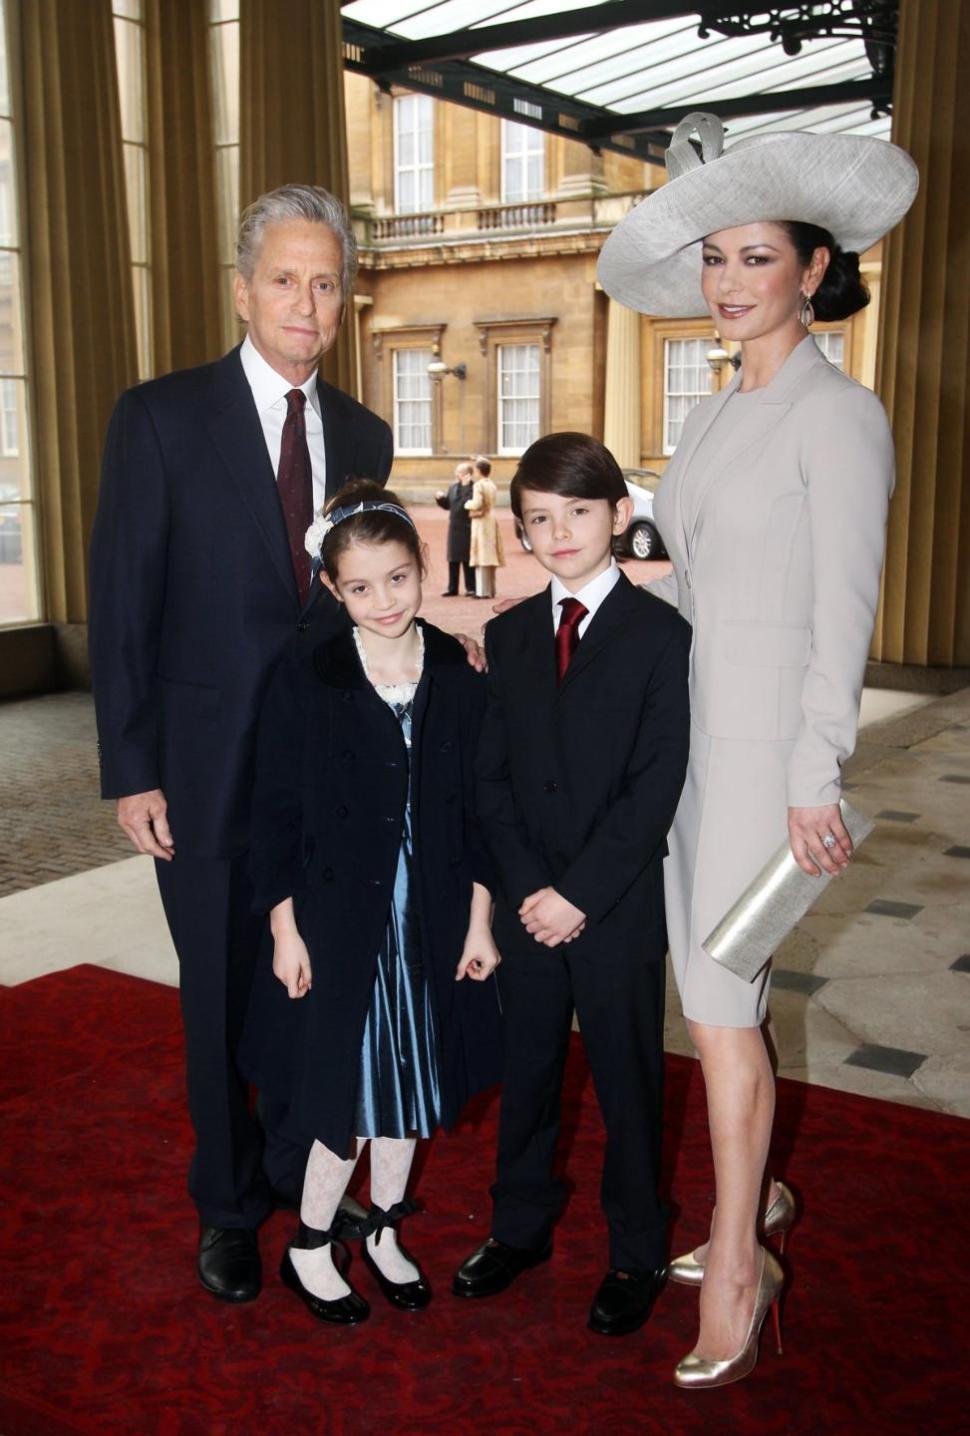 Michael Douglas, seen here in 2011, opened up in an op-ed piece about an anti-Semitic attack on his son Dylan (2nd from right) while on a family vacation with wife Catherine Zeta-Jones.